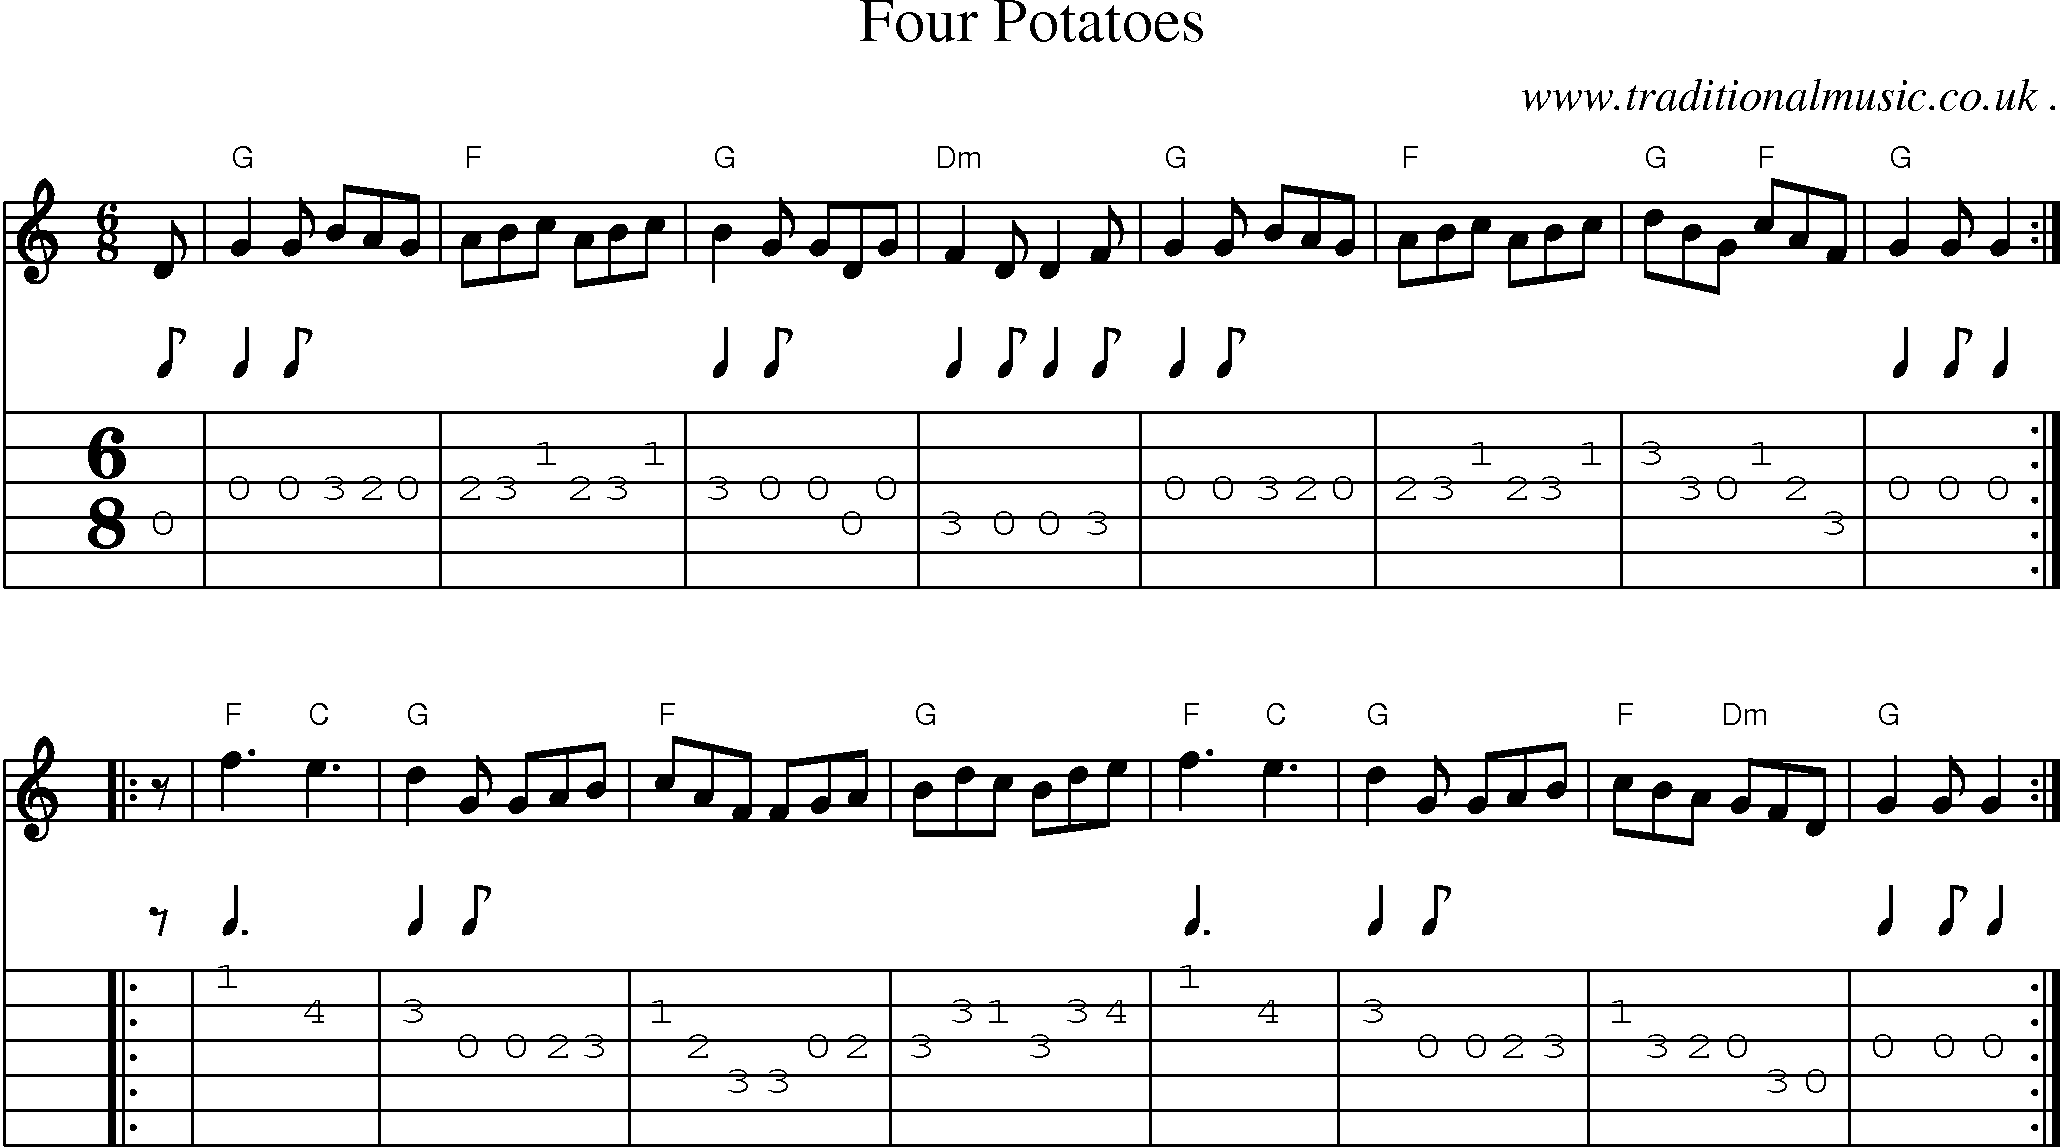 Sheet-music  score, Chords and Guitar Tabs for Four Potatoes